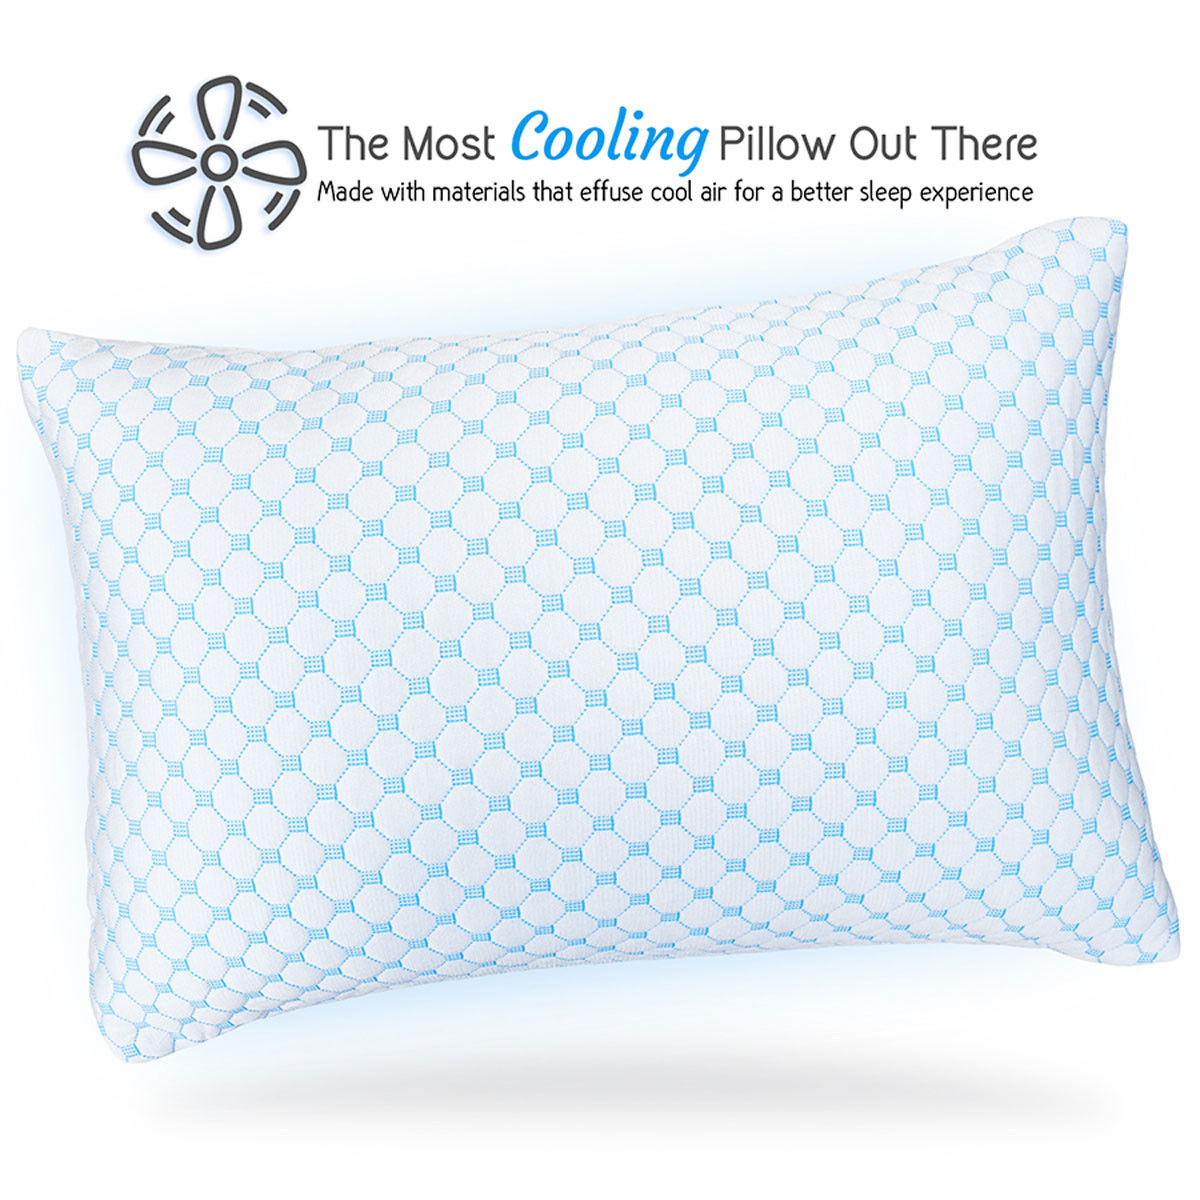 Does this pillow come with extra-filling?